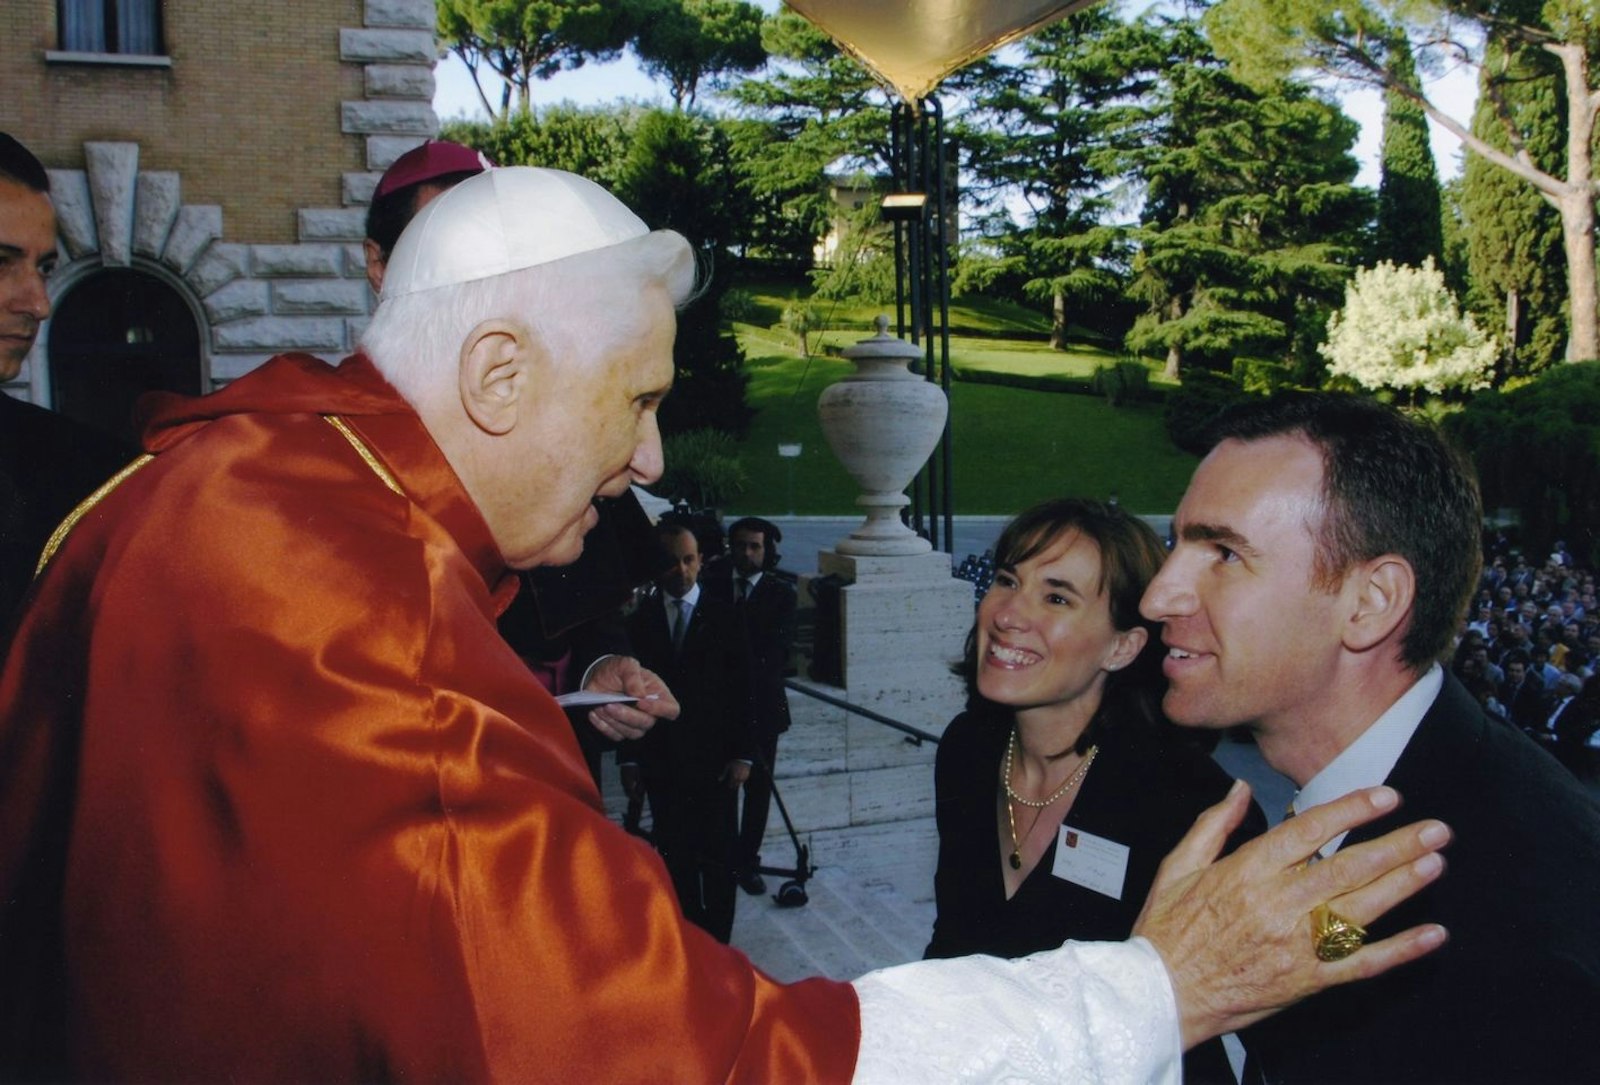 John Hale and his wife meet Pope Benedict XVI in 2007. The family also saw the pope in 2008. Hale said he's always had a love for Pope Benedict and his holy presence. (Photo courtesy of John Hale)